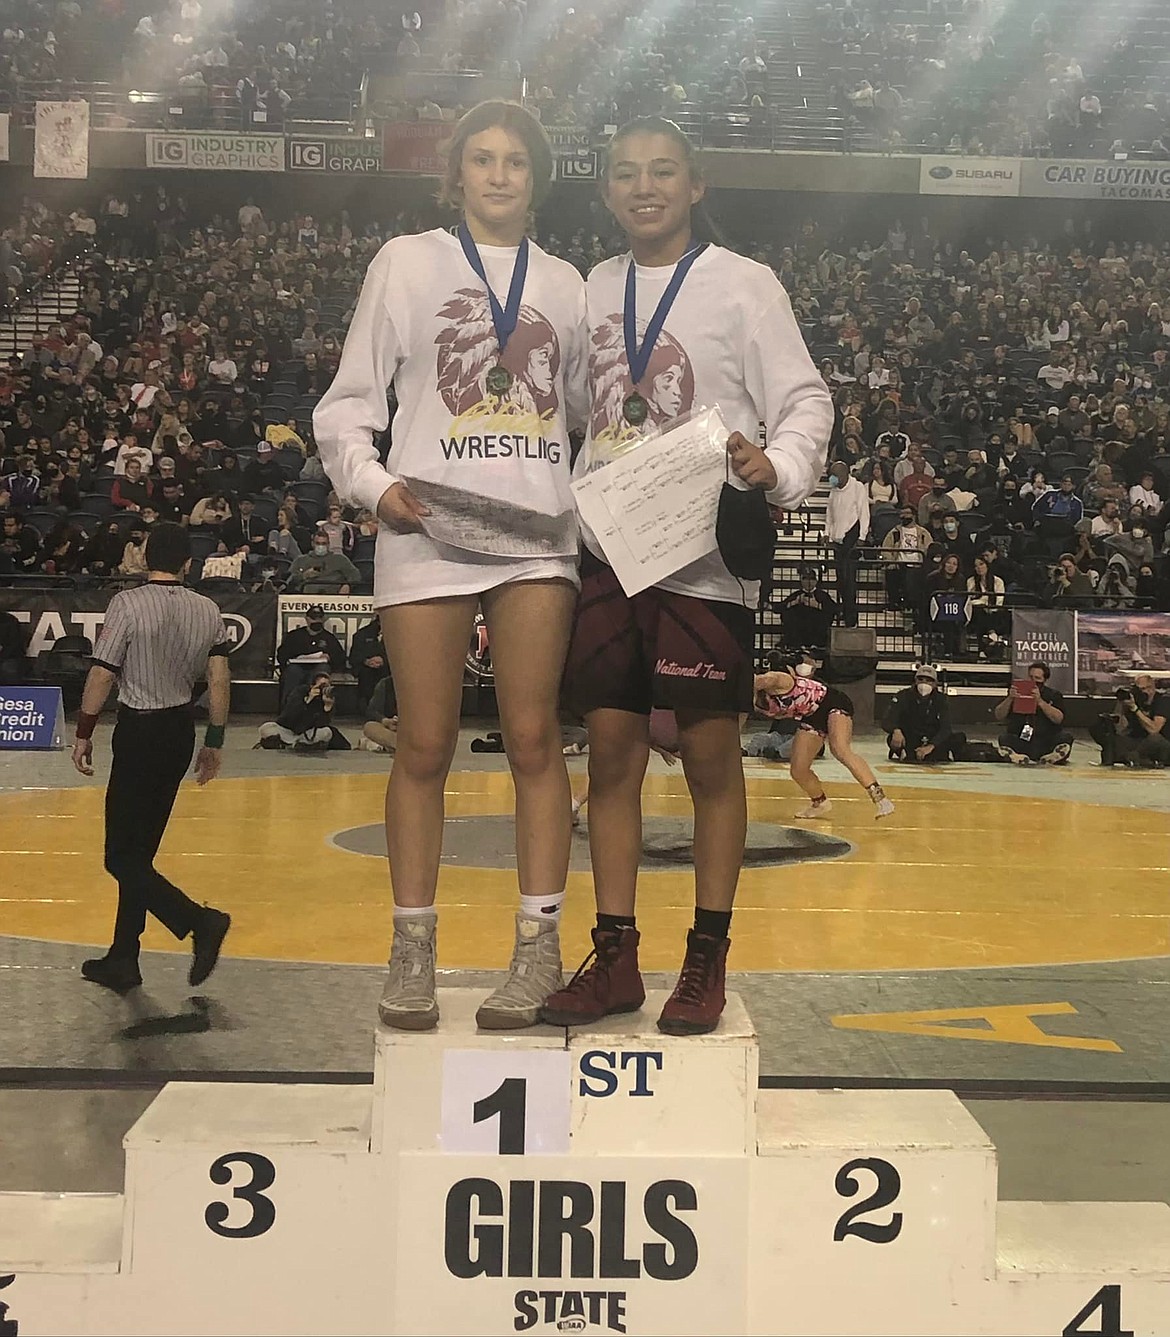 Moses Lake seniors Bianca Johnson (left) and Ashley Naranjo (right) stand atop the podium at last year’s state tournament. Both Johnson and Naranjo placed first in their weight classes.